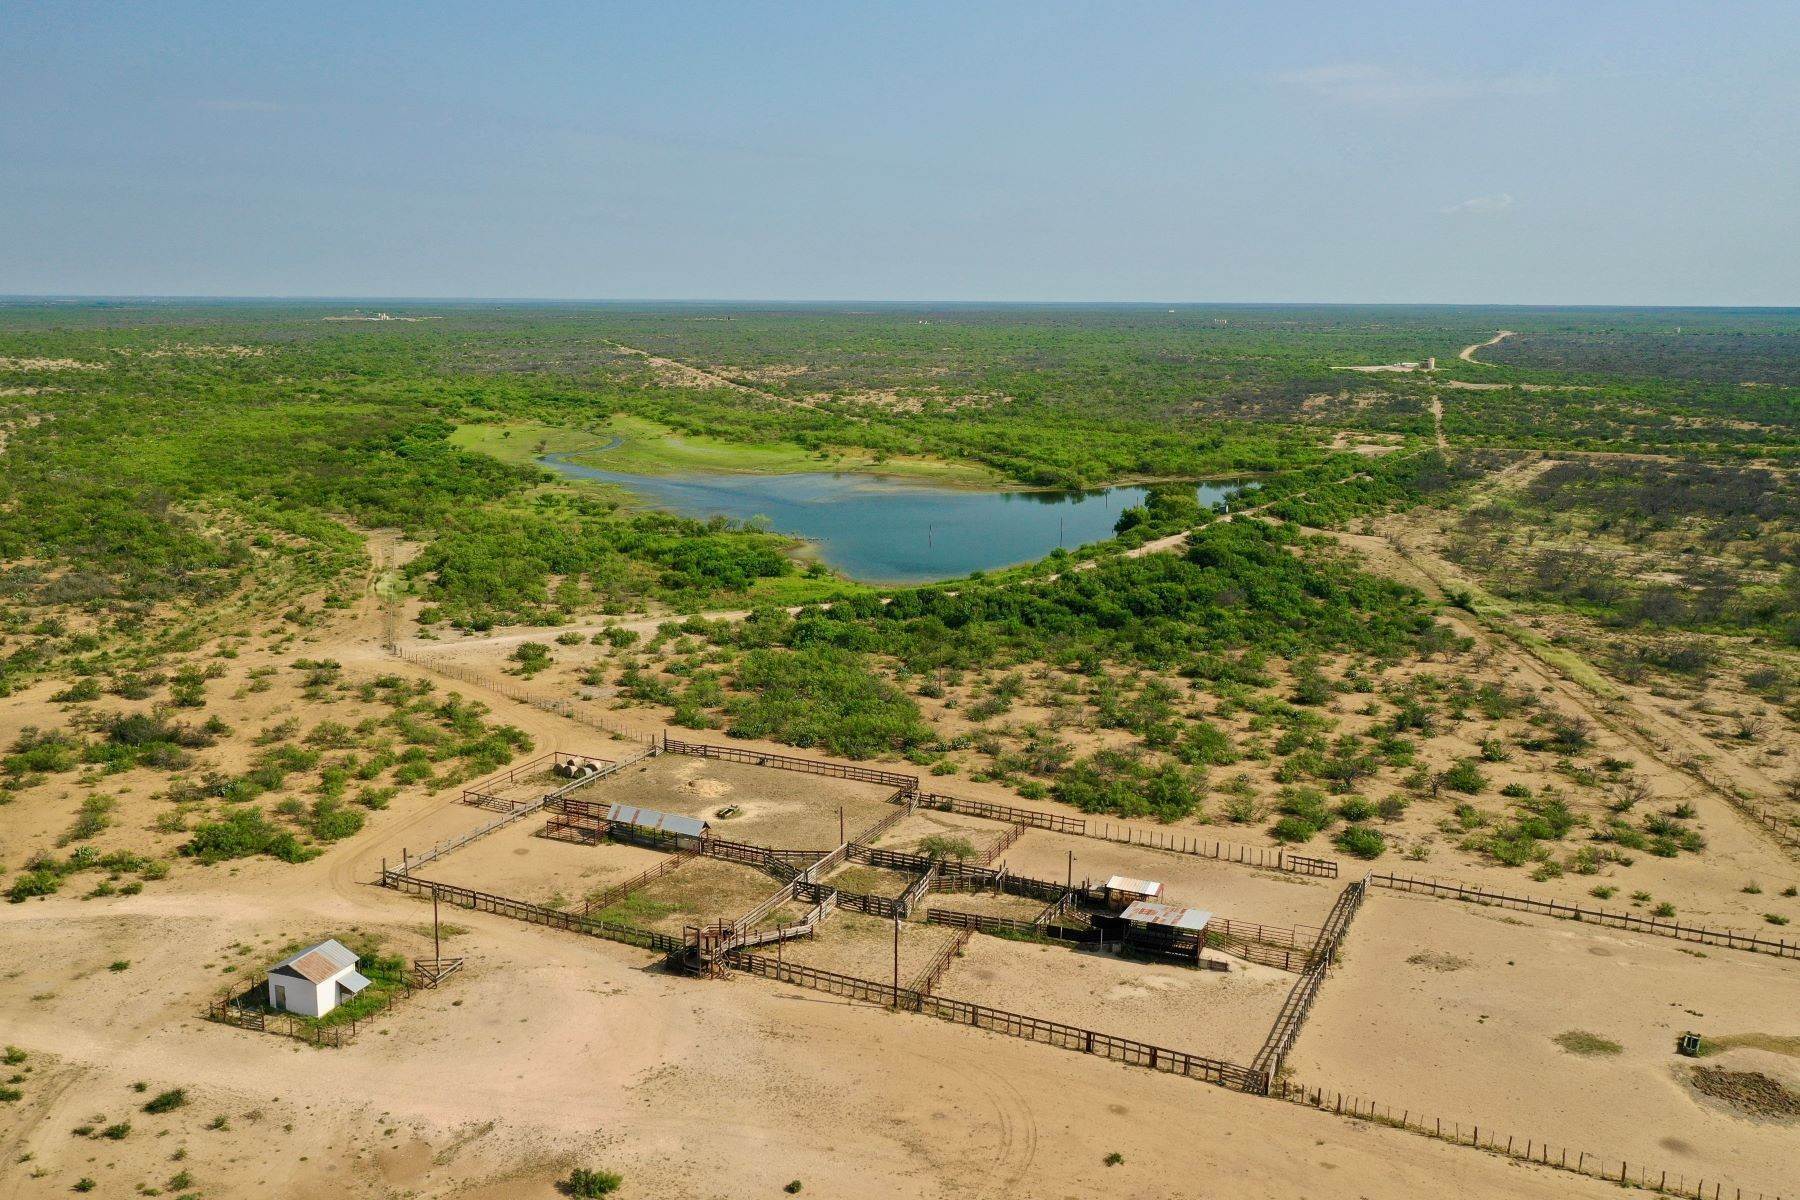 Property for Sale at 15,963+/- Acres El Indio Cage Ranch , Carrizo Springs, TX 78860 15,963+/- Acres El Indio Cage Ranch Carrizo Springs, Texas 78860 United States